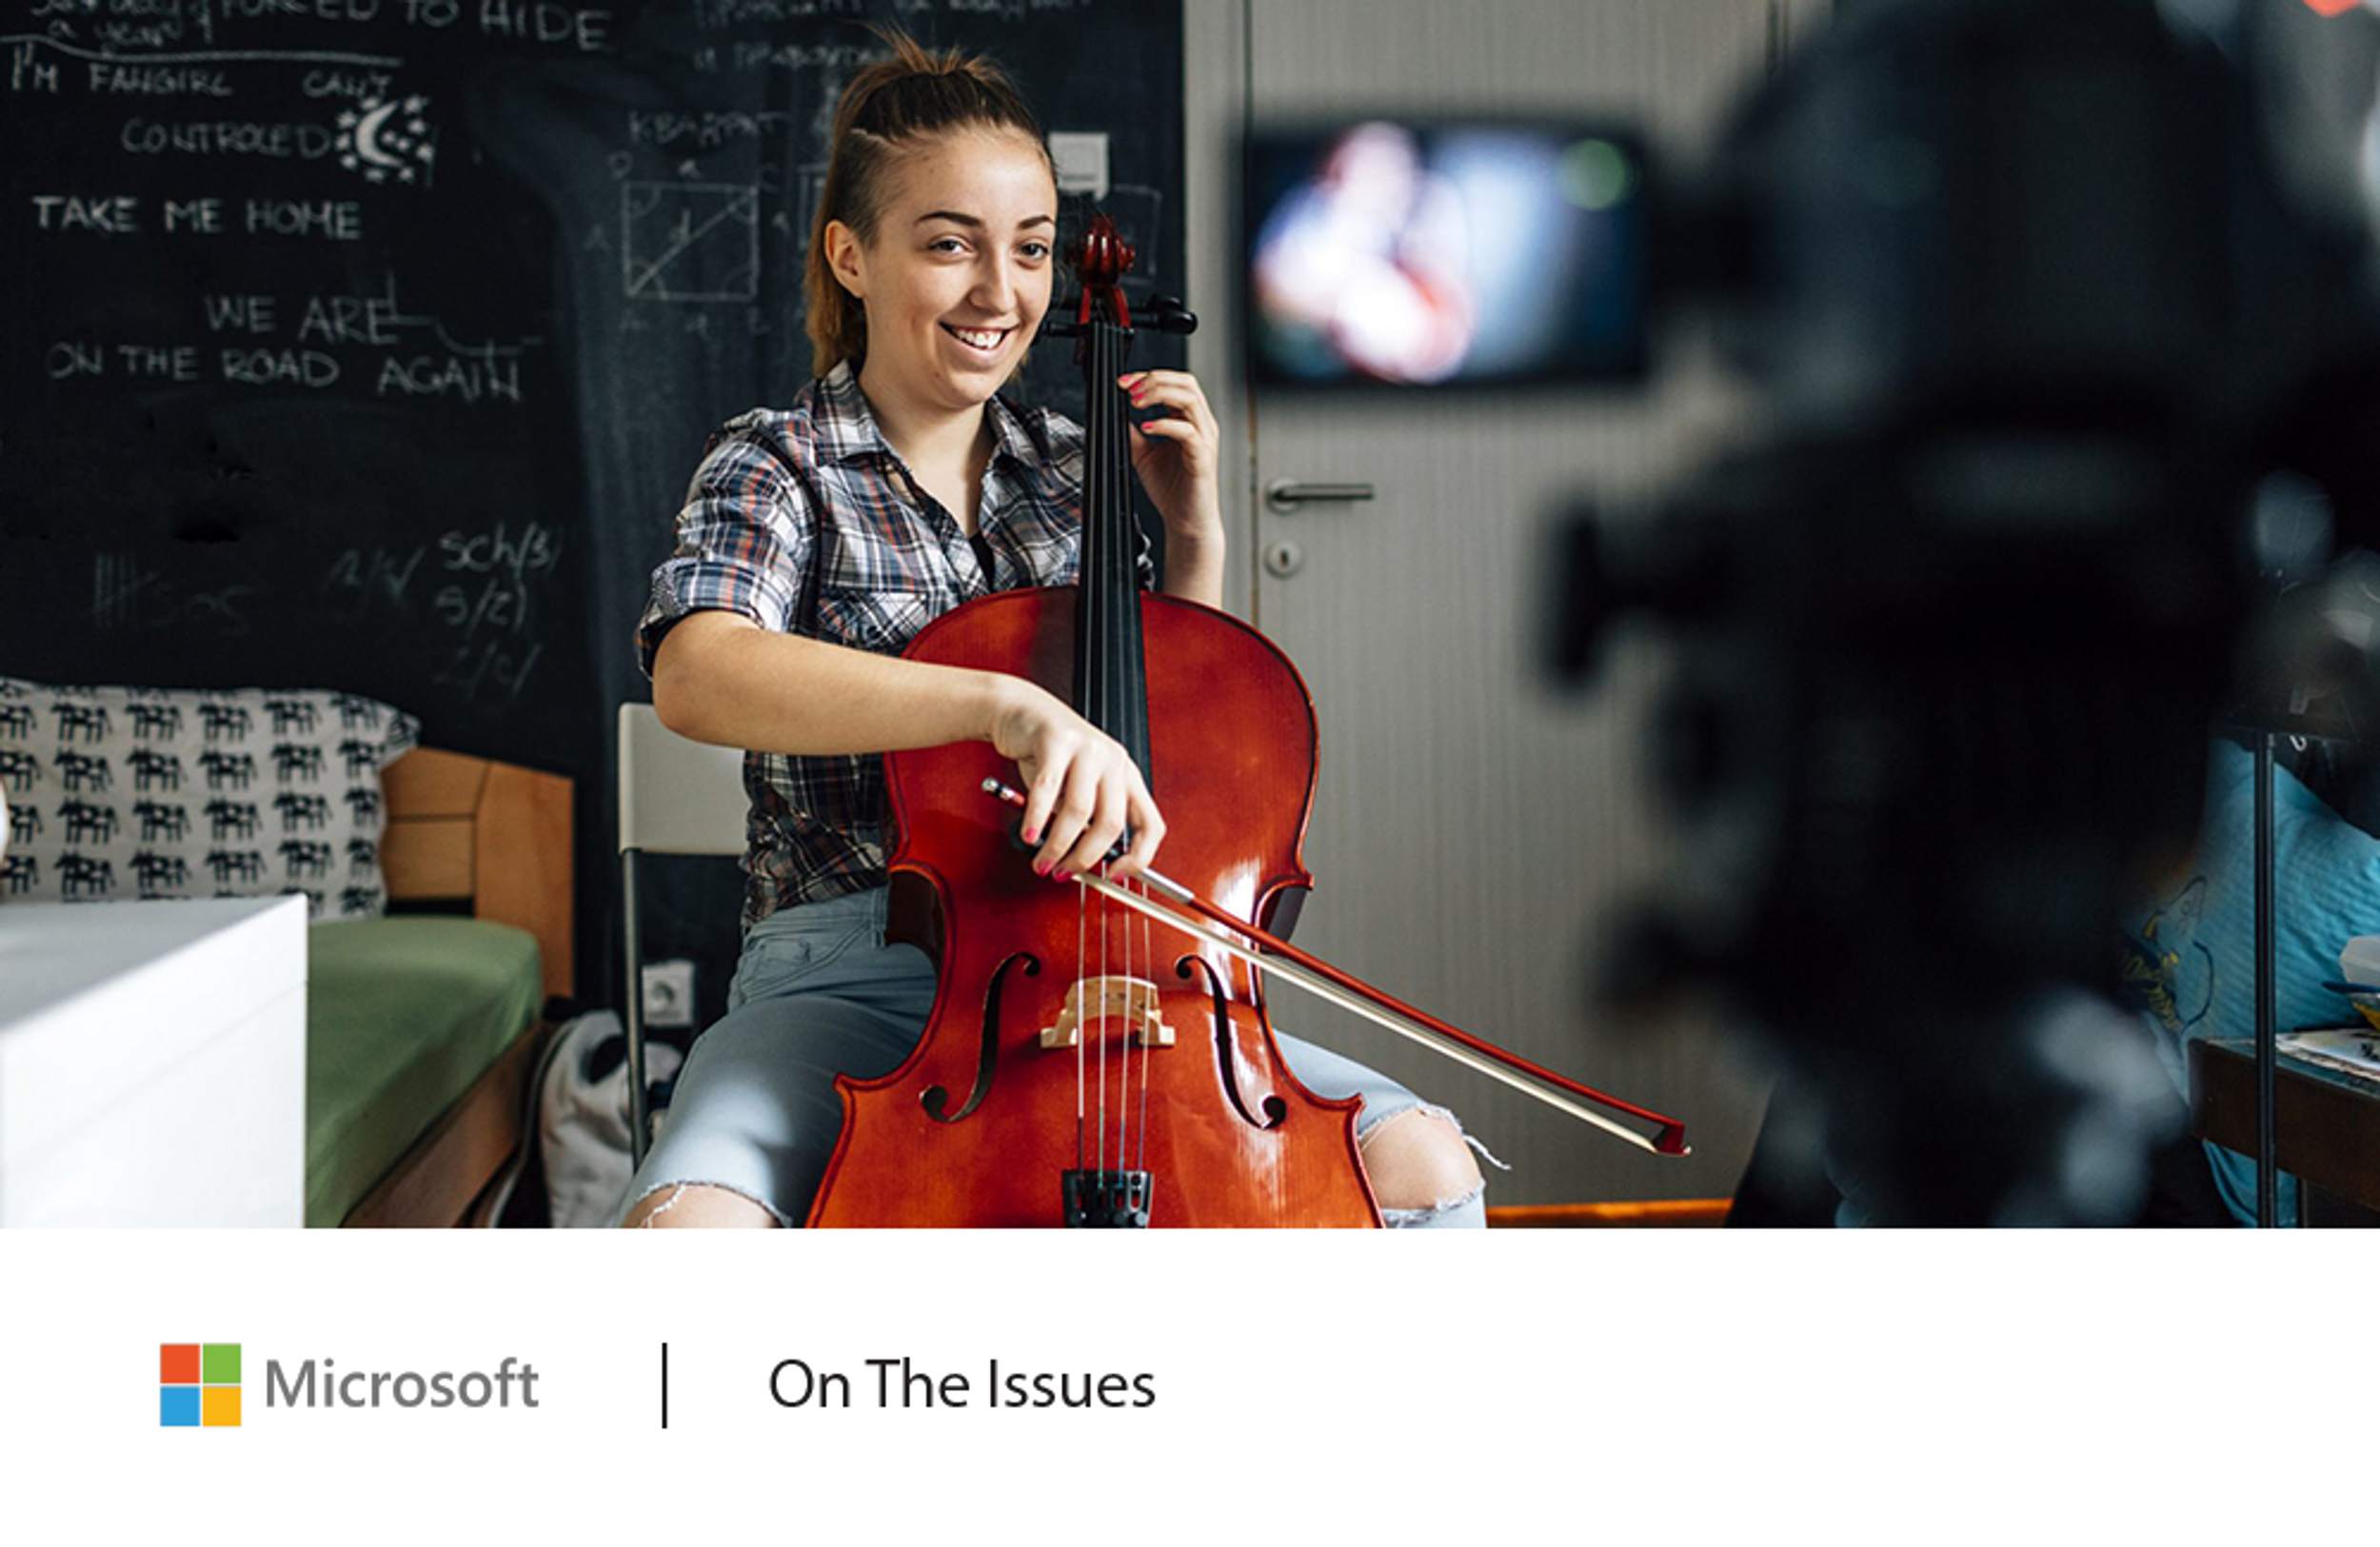 Teen girl playing cello: New Microsoft data shows improved civility online, driven by teens